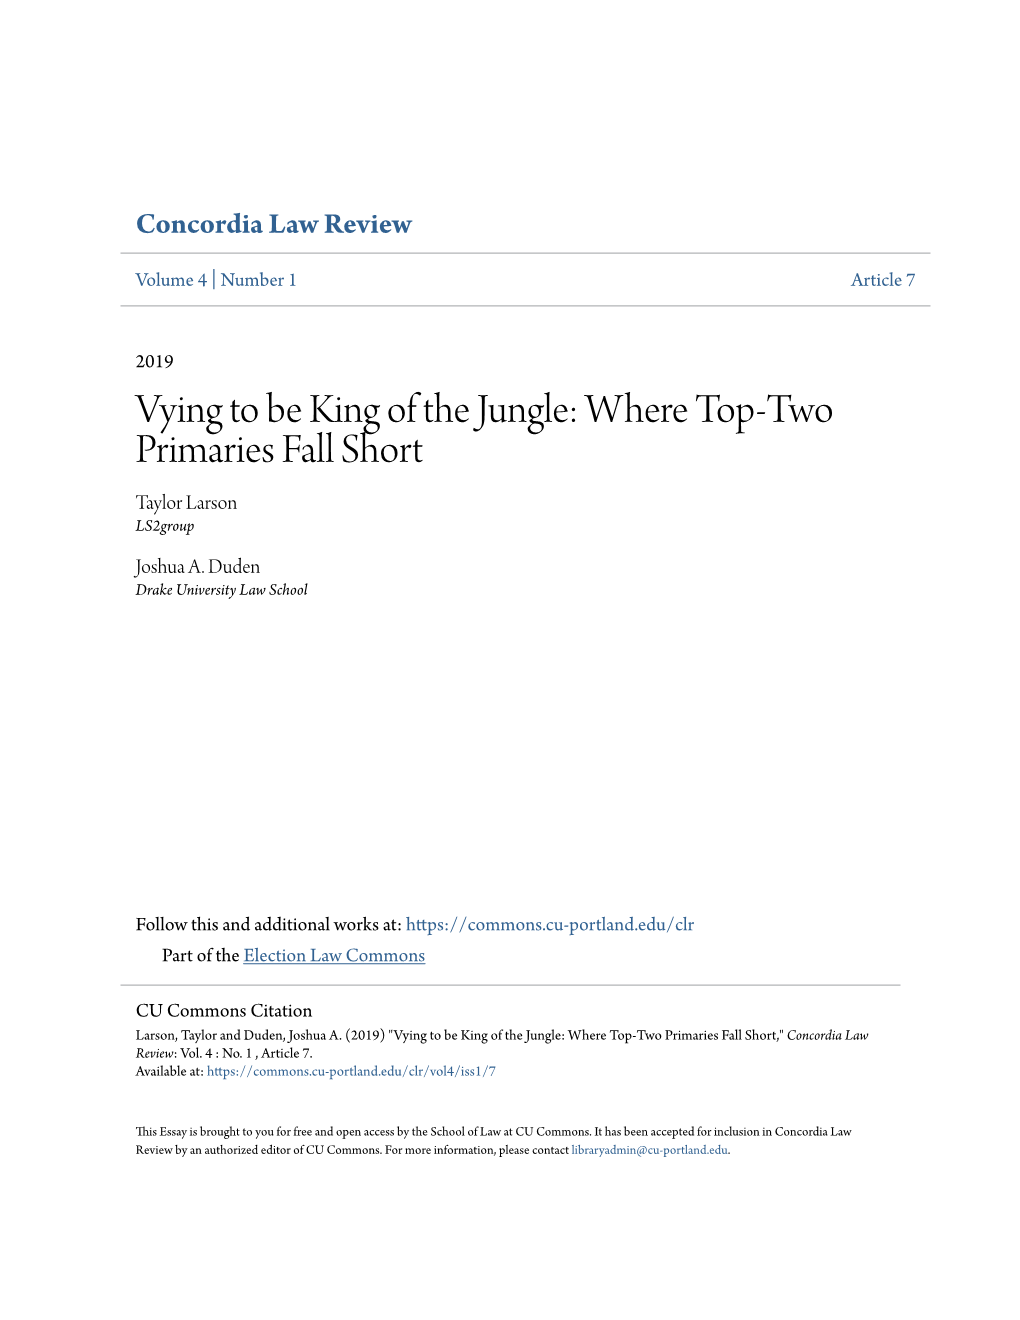 Vying to Be King of the Jungle: Where Top-Two Primaries Fall Short Taylor Larson Ls2group